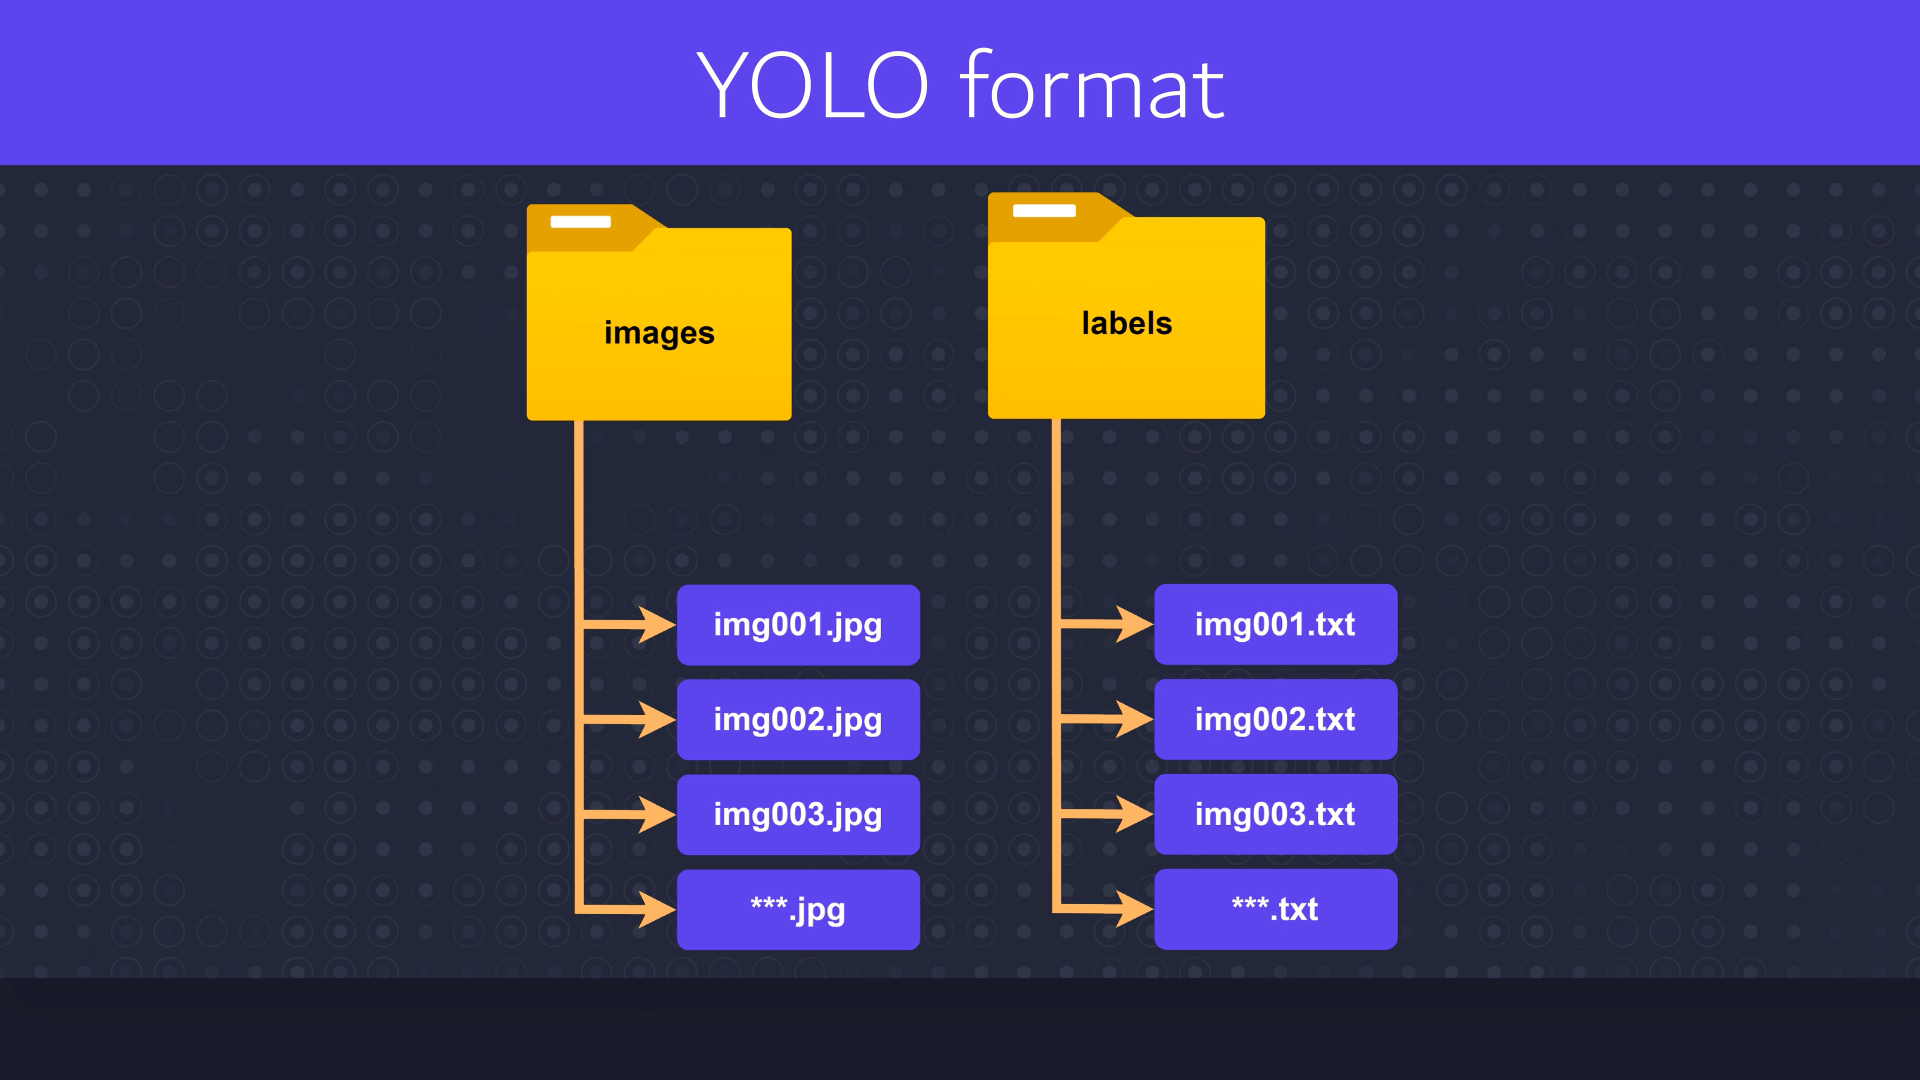 Files structure of the labels and annotations for YOLO format